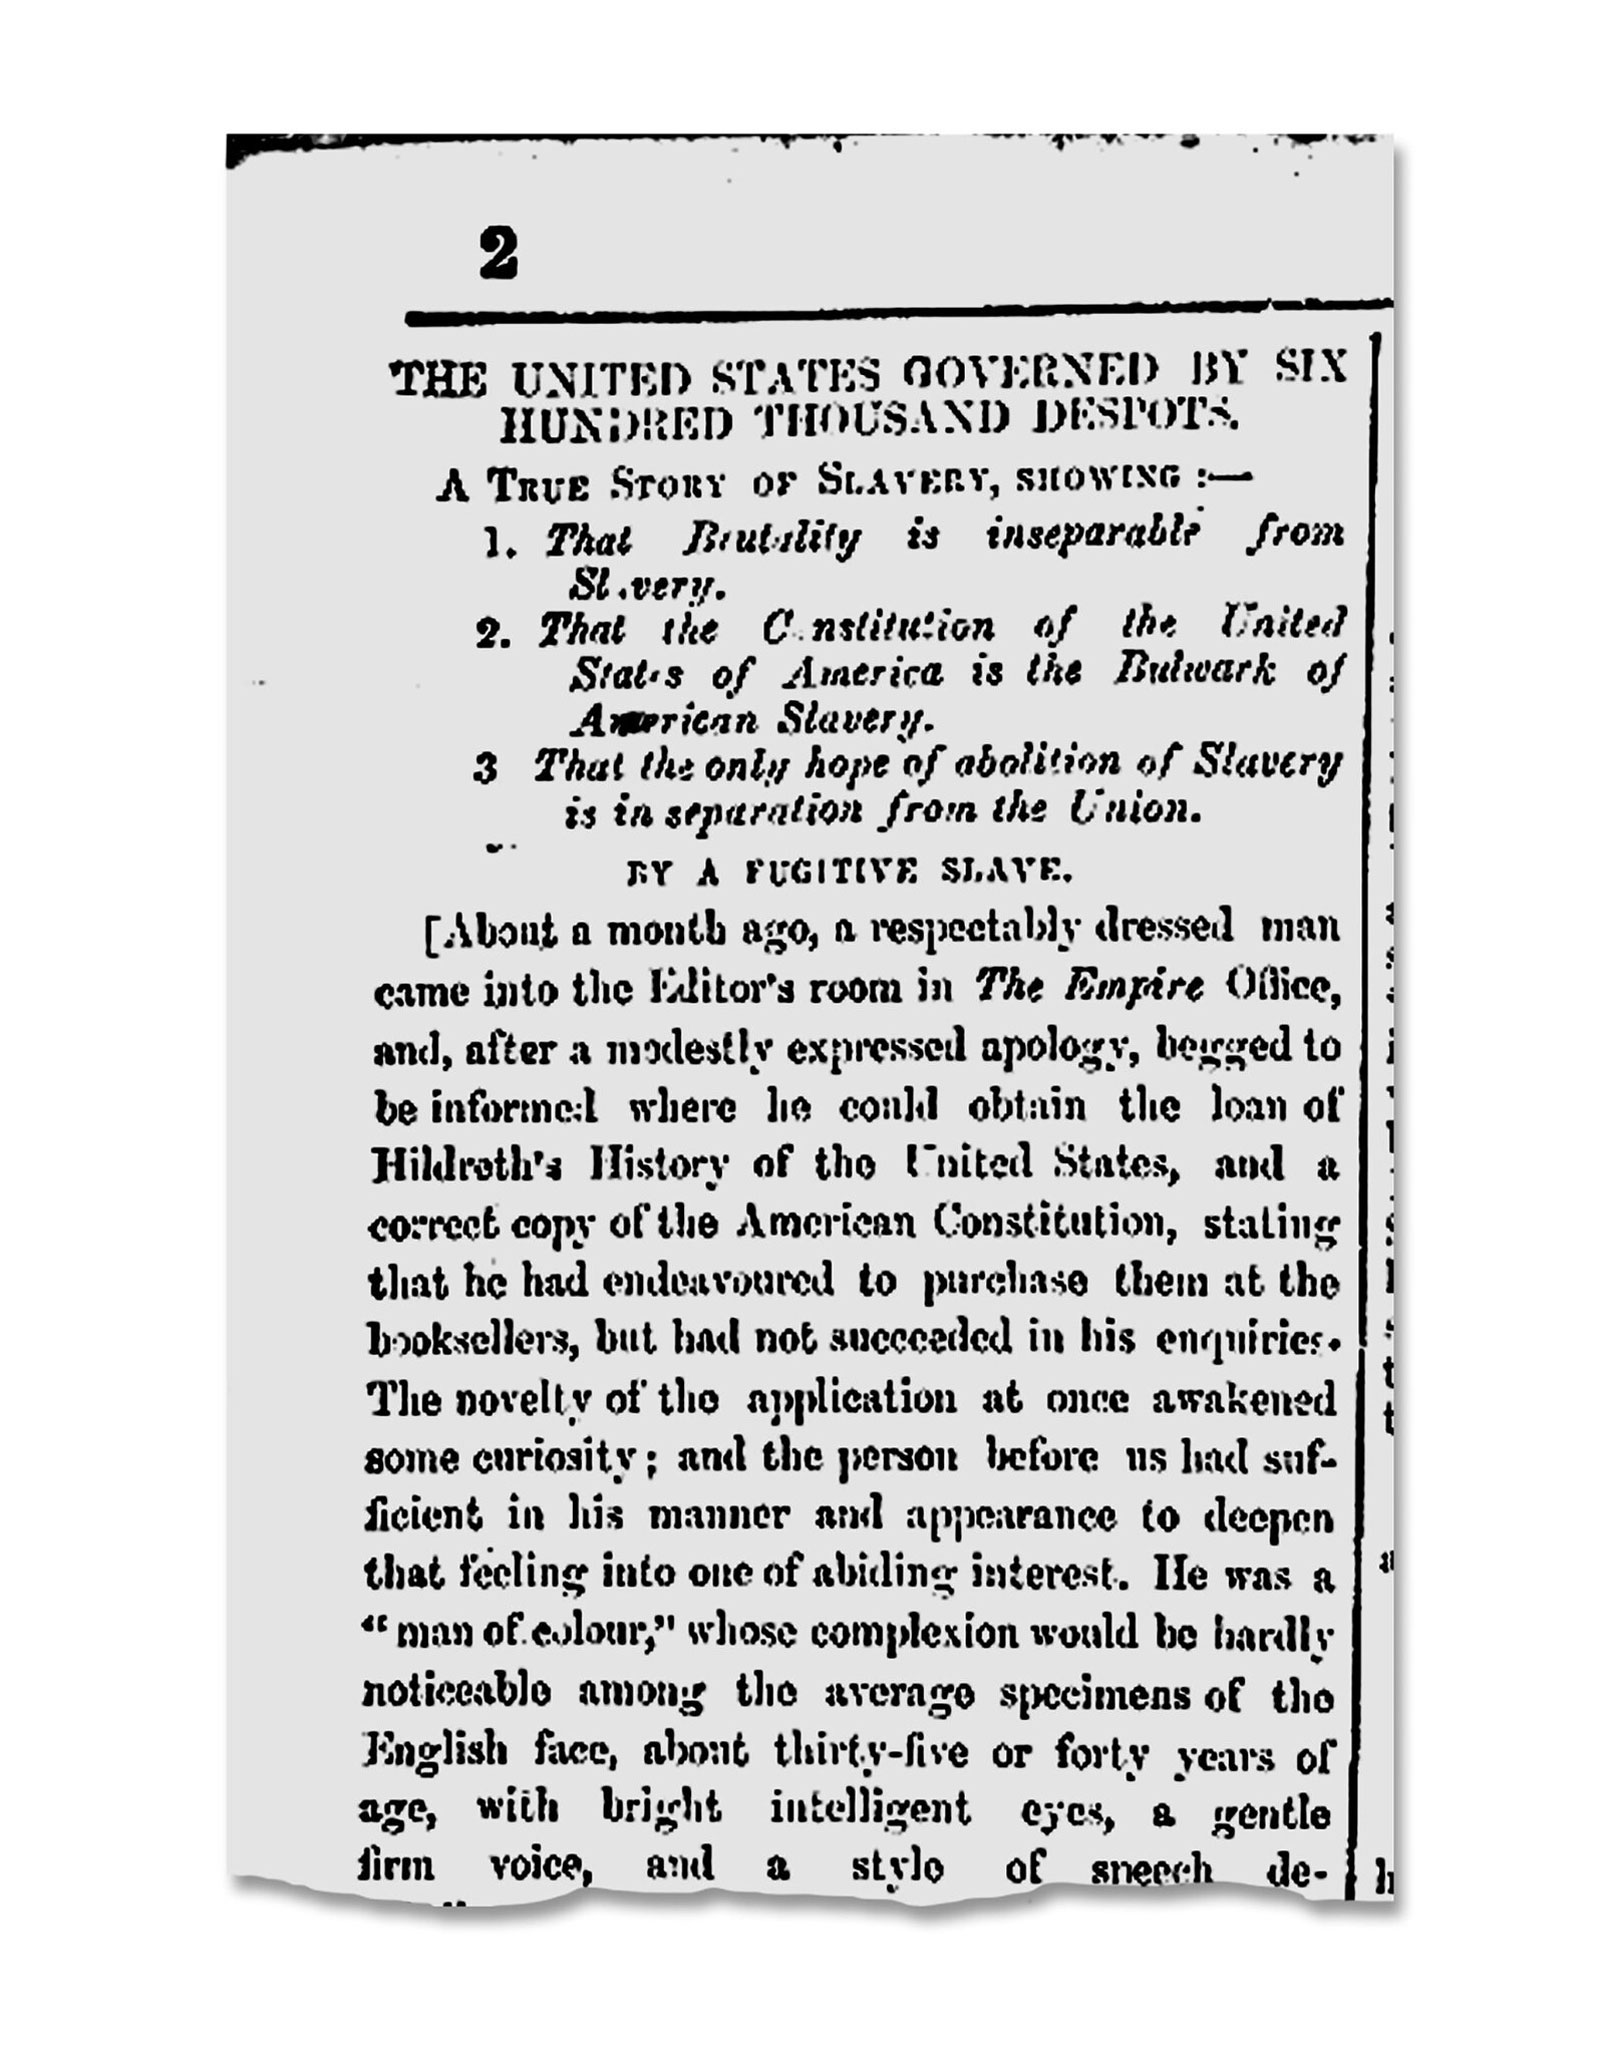 Jacobs’s narrative originally appeared in April 1855 in The Empire, a newspaper in Sydney, Australia, credited only to “a Fugitive Slave.”